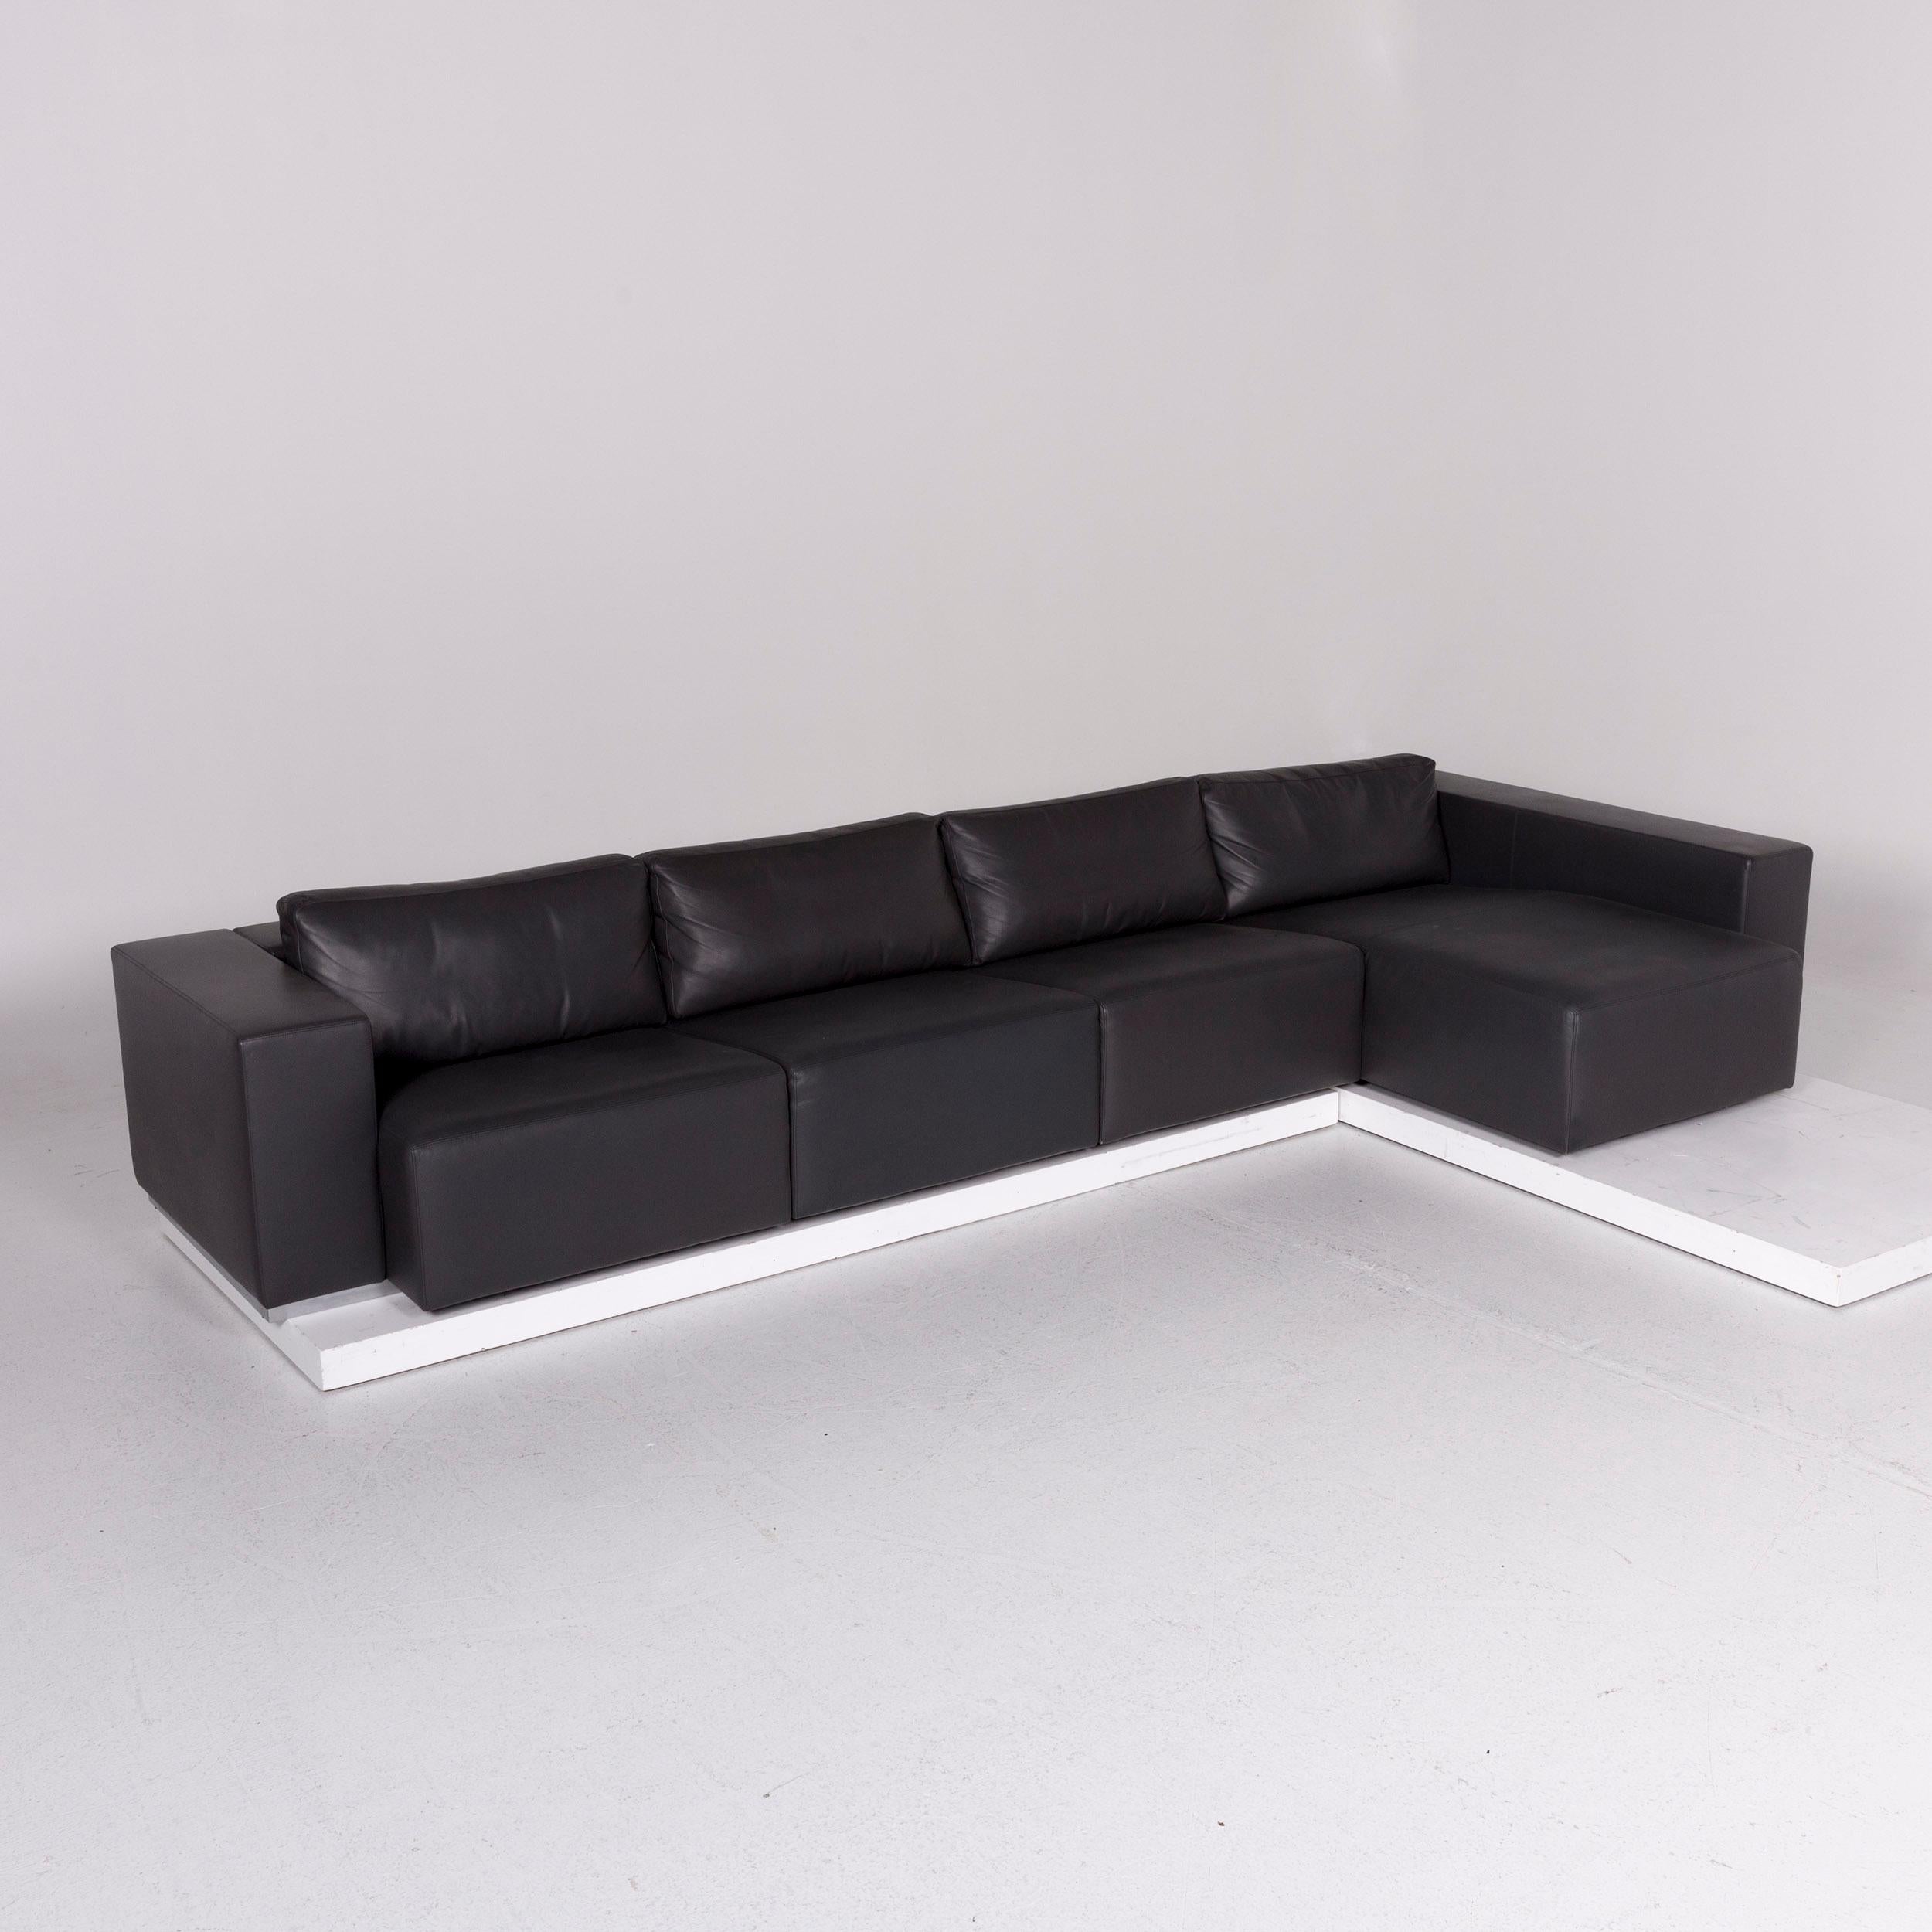 We bring to you a Walter Knoll Nelson leather corner sofa gray sofa couch.

 
 Product measurements in centimeters:
 
Depth 103
Width 360
Height 58
Seat-height 40
Rest-height 57
Seat-depth 63
Seat-width 311
Back-height 31.